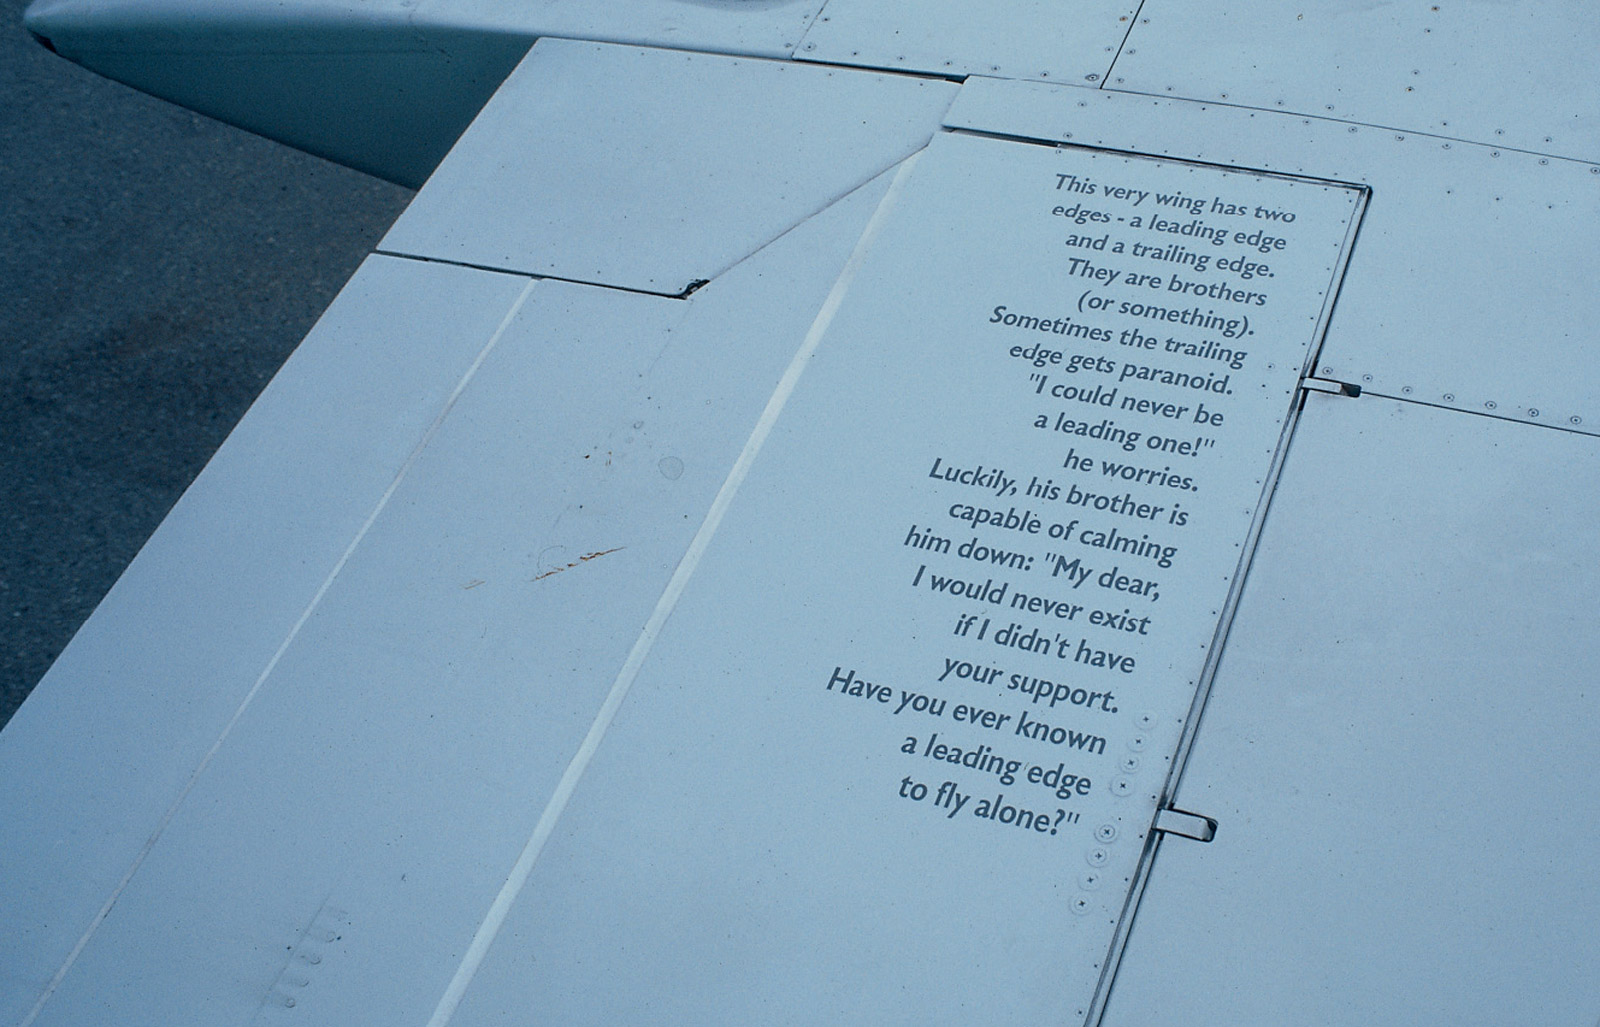 A photograph of text on the wing of an airplane narrating a brotherly rivalry between the two edges of the plane.